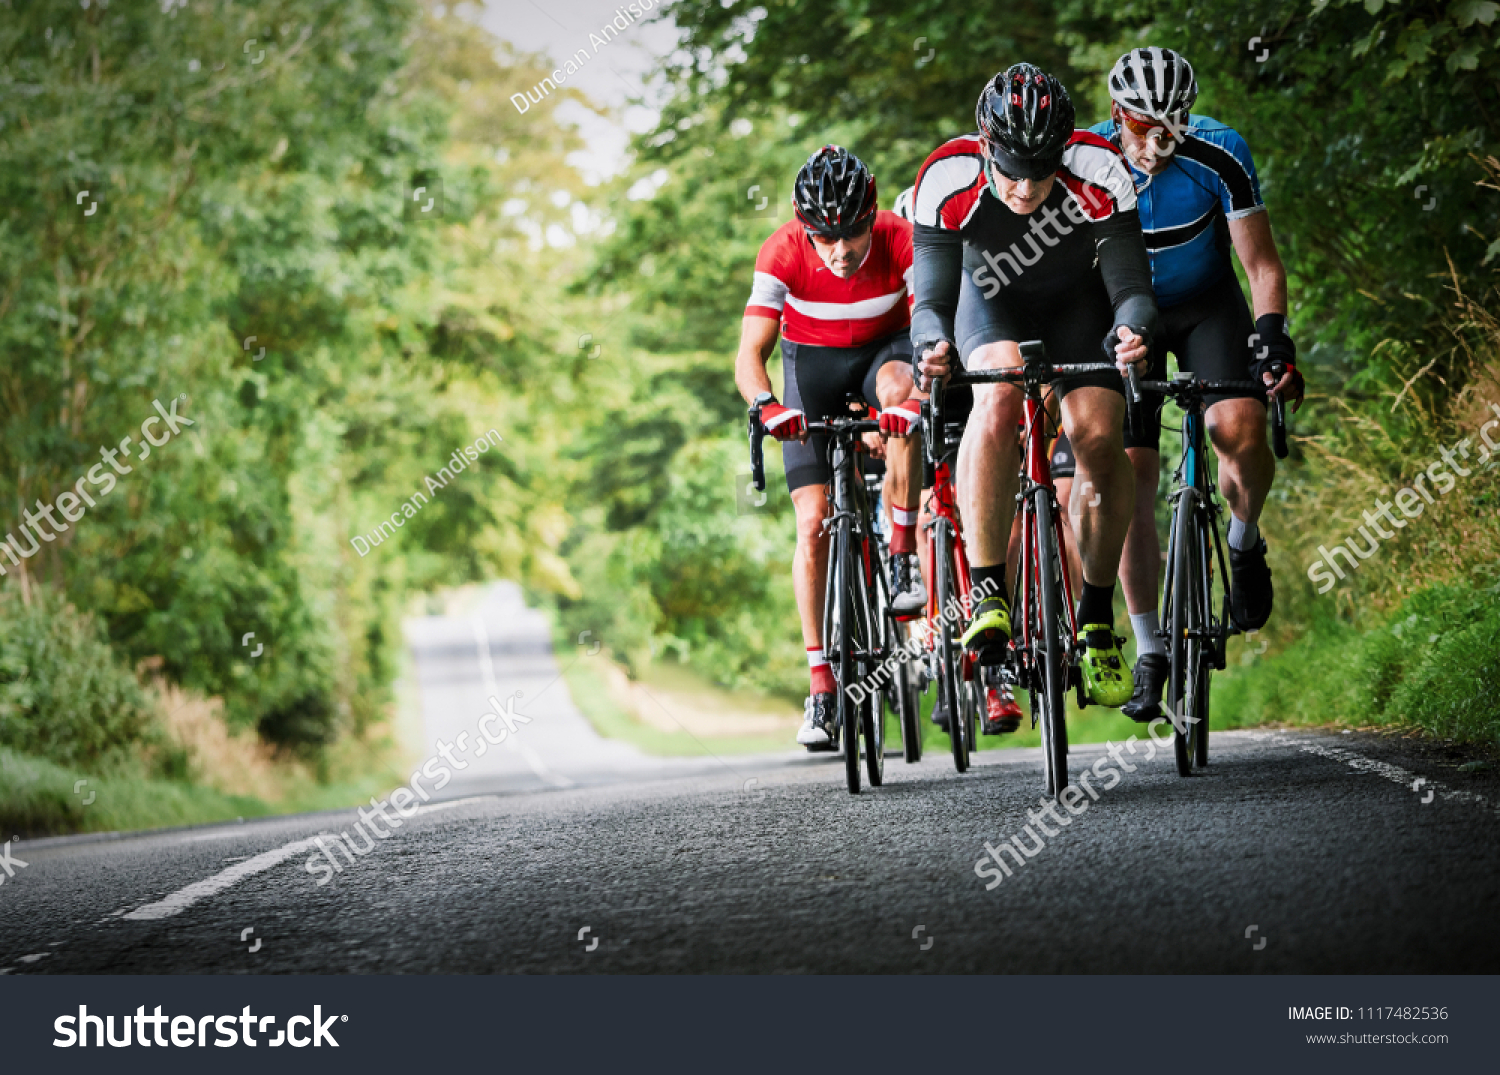 Cyclists racing on country roads on a sunny day in the UK. #1117482536